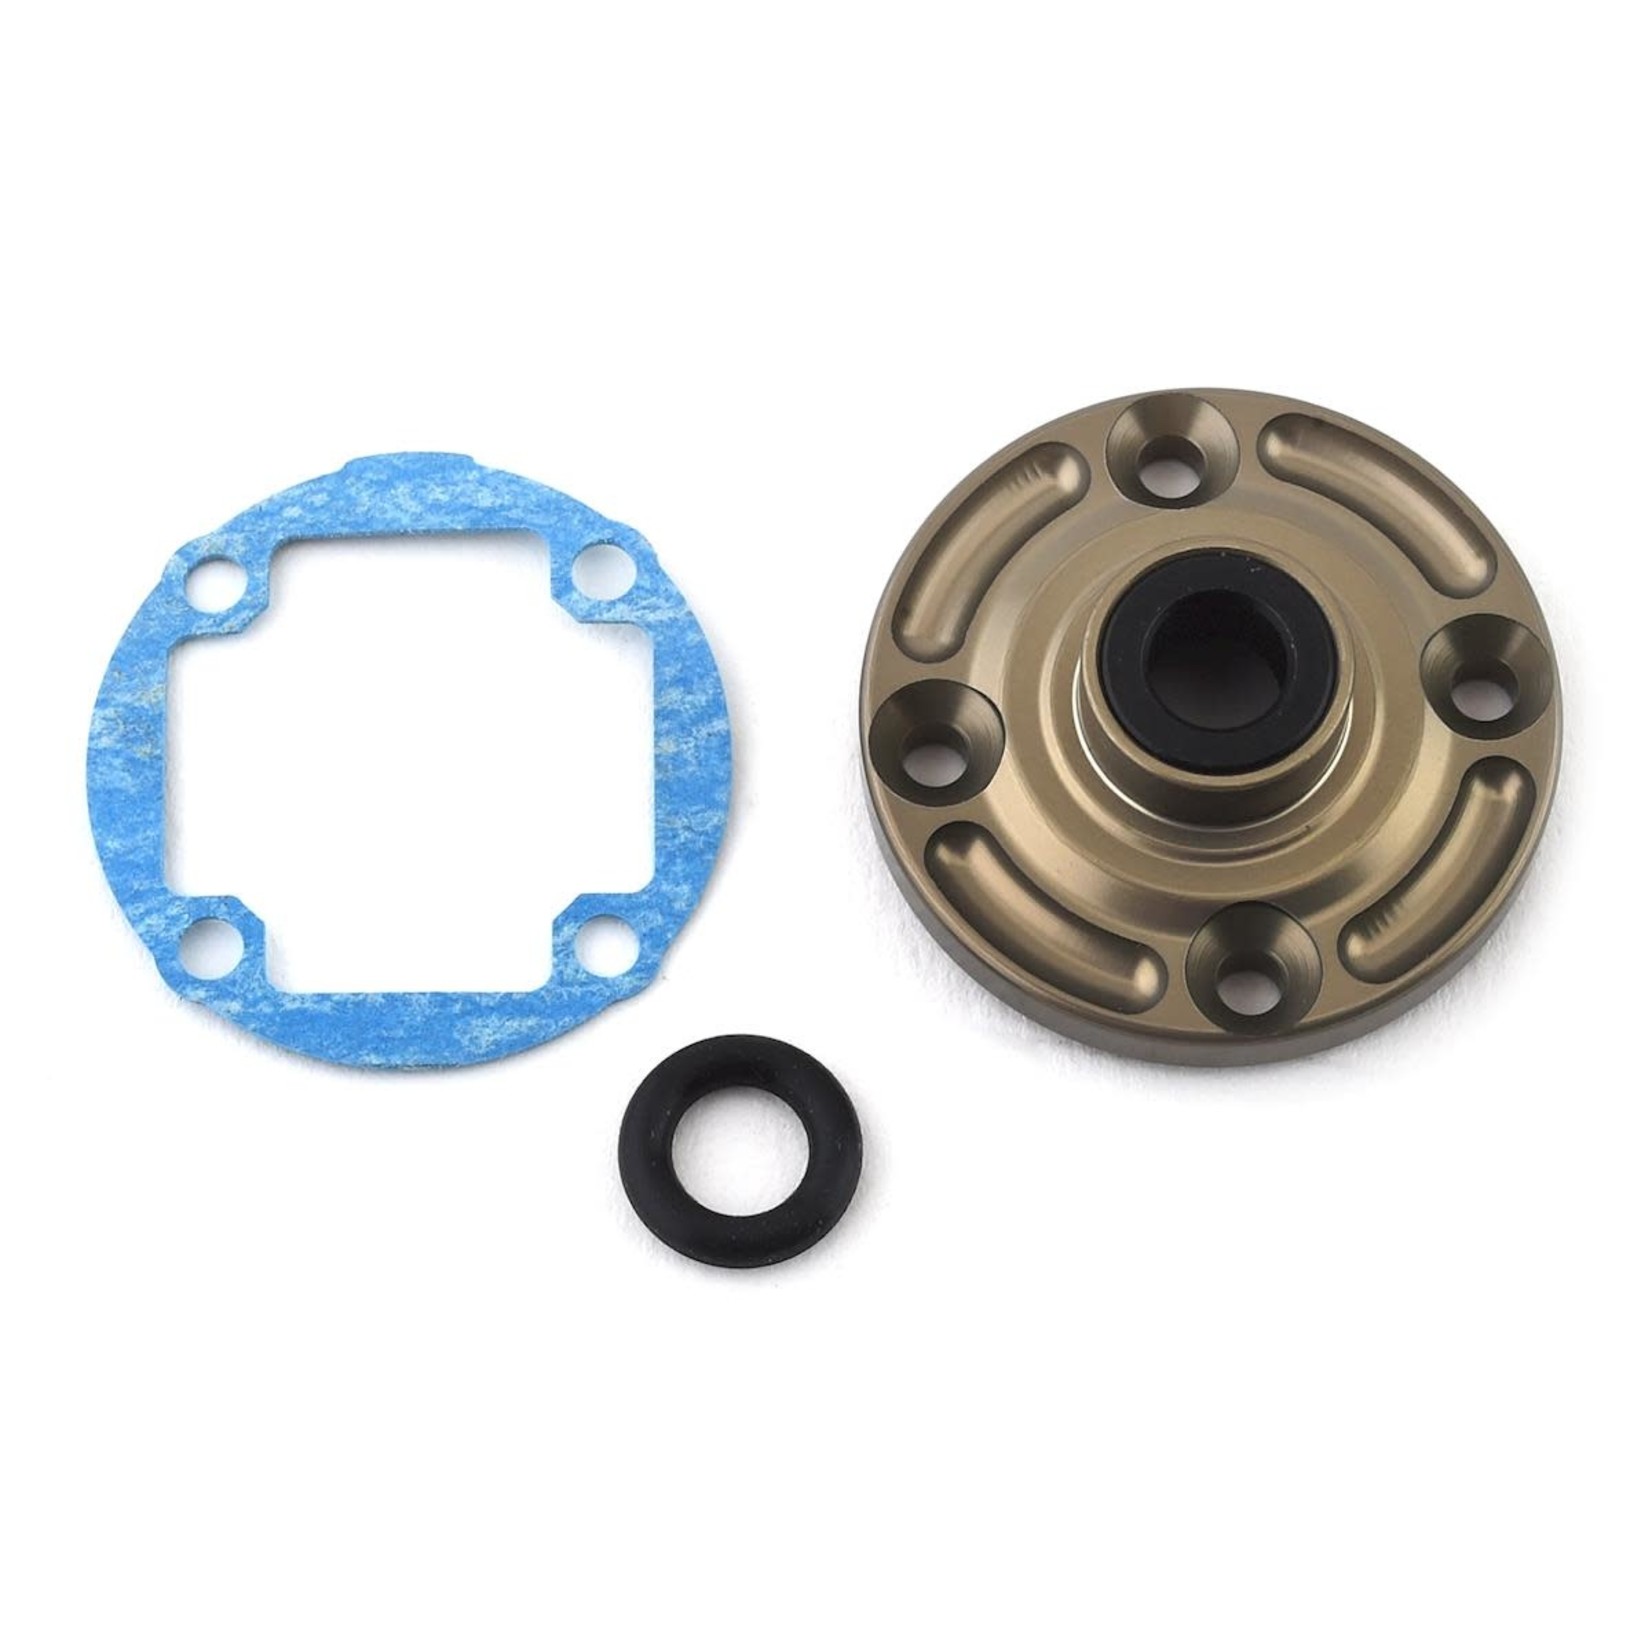 TLR Team Losi Racing Aluminum G2 Gear Differential Cover #TLR332077